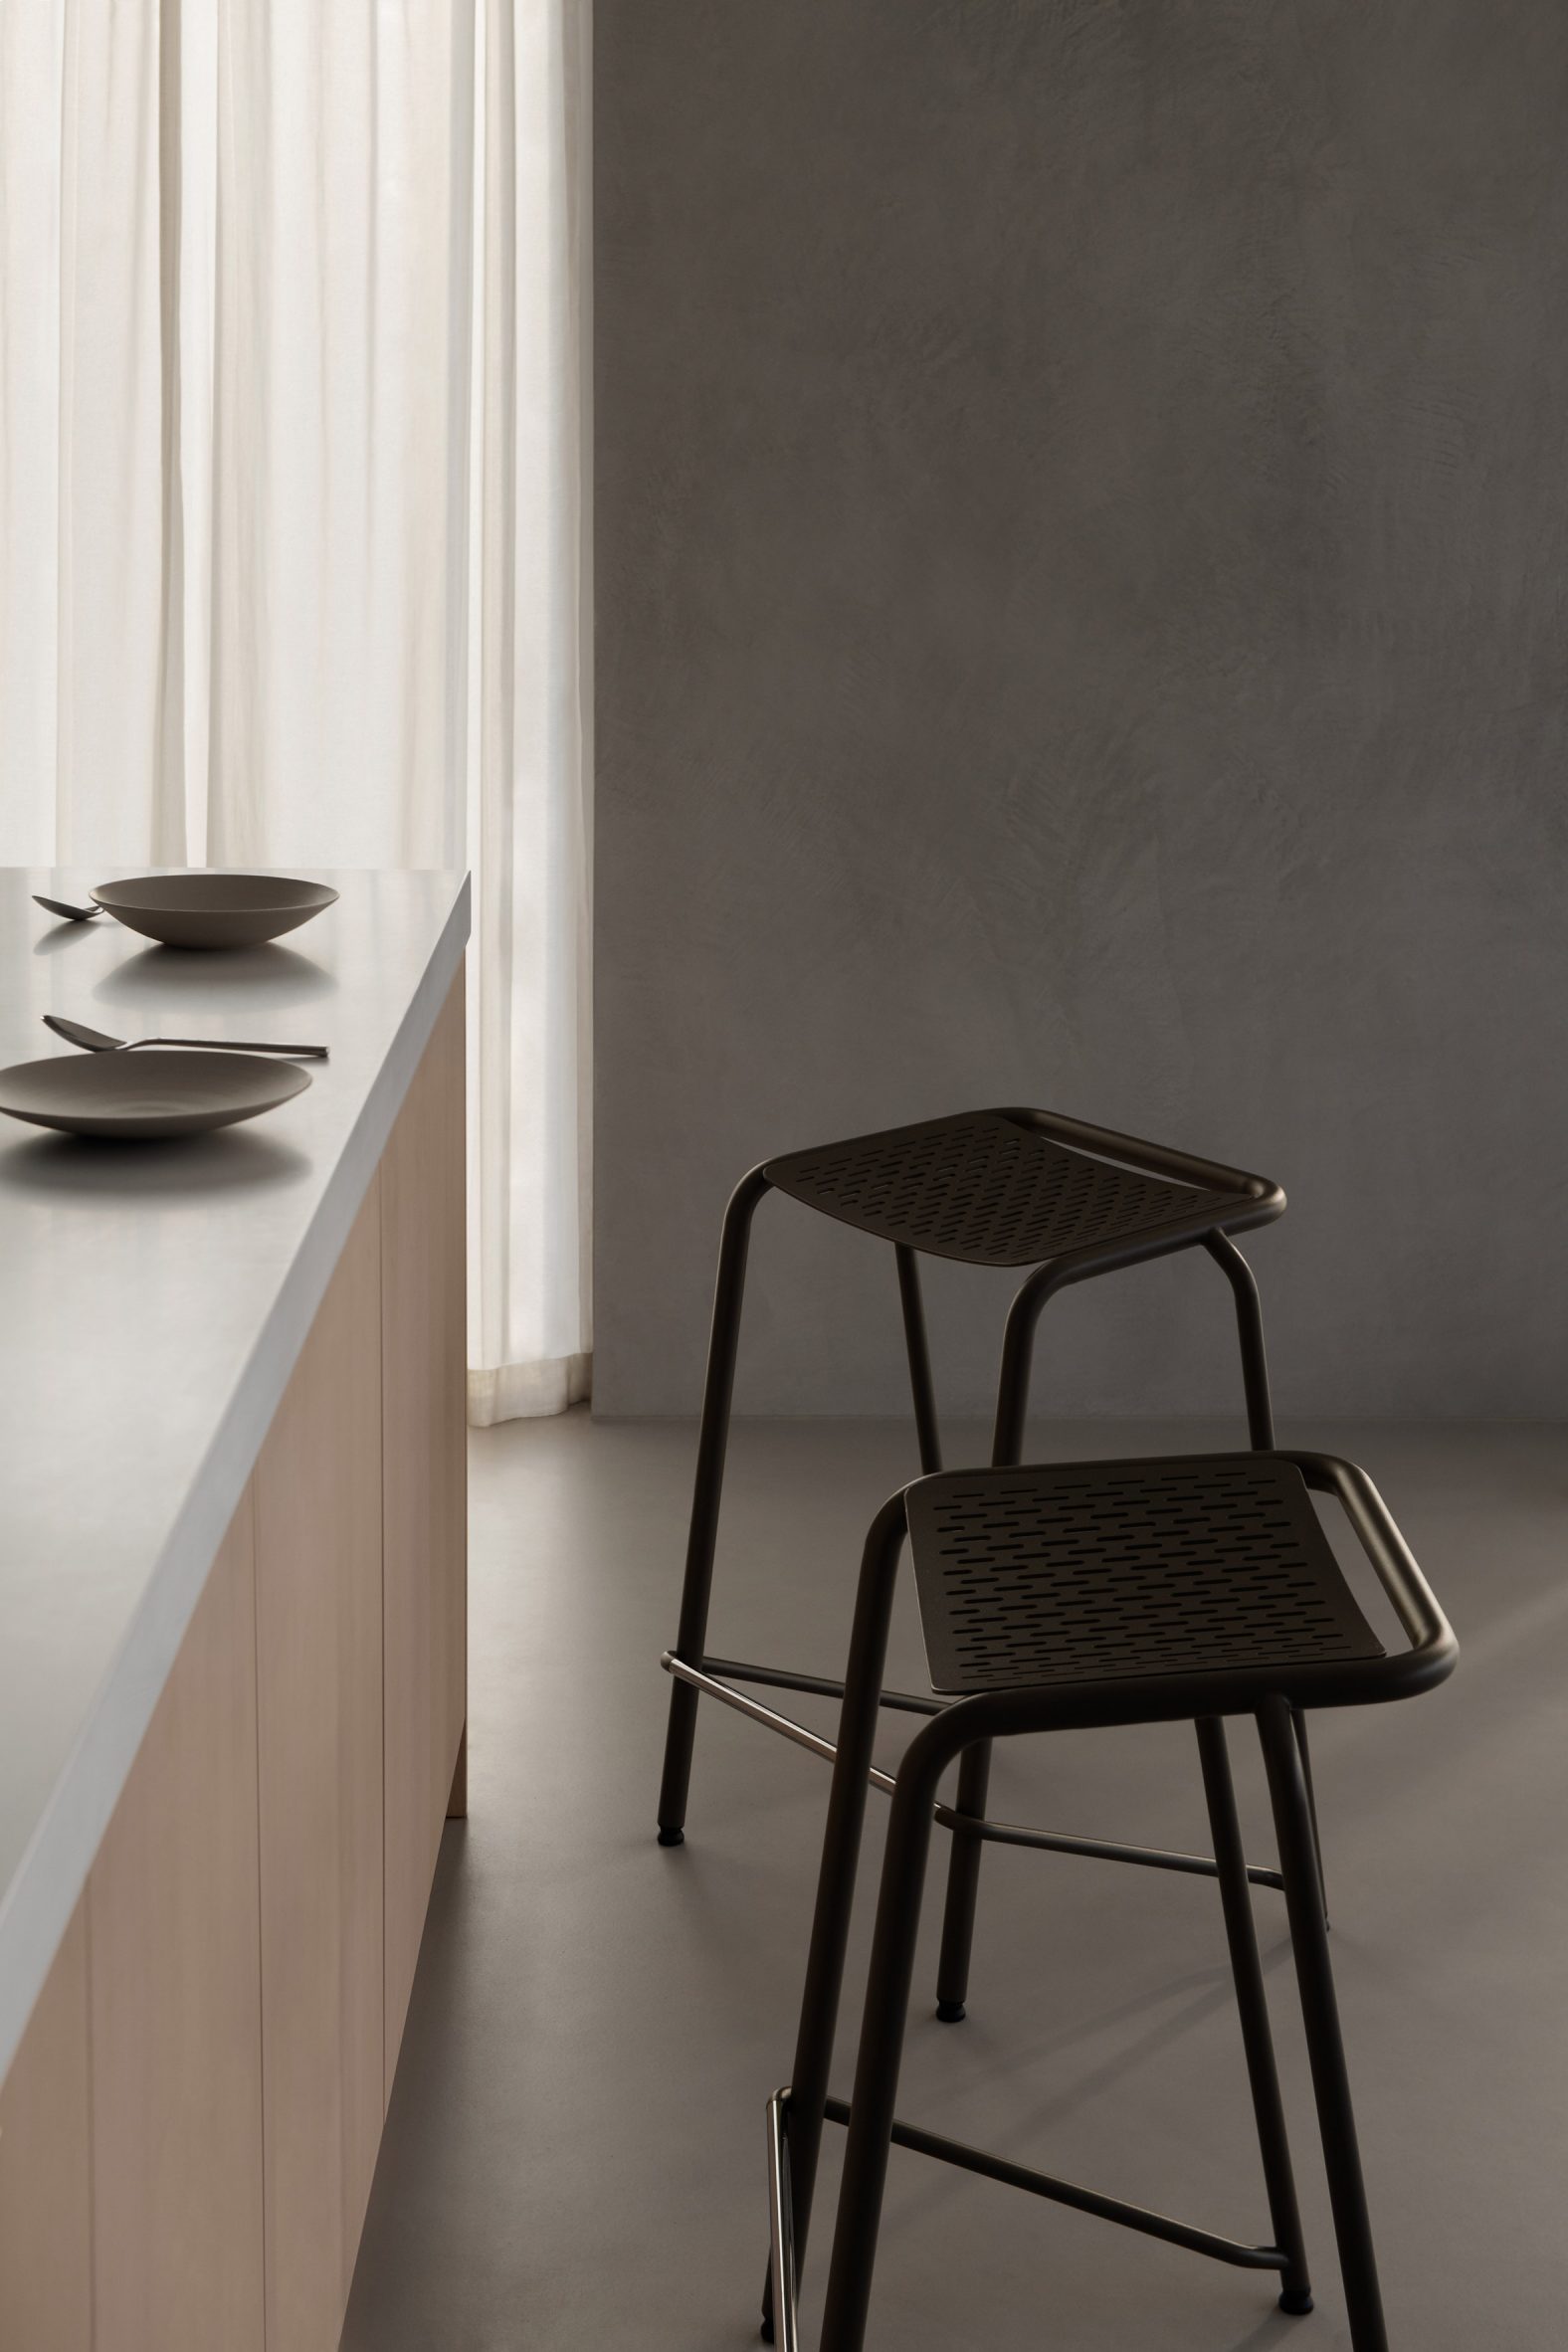 Two black stools and a kitchen counter